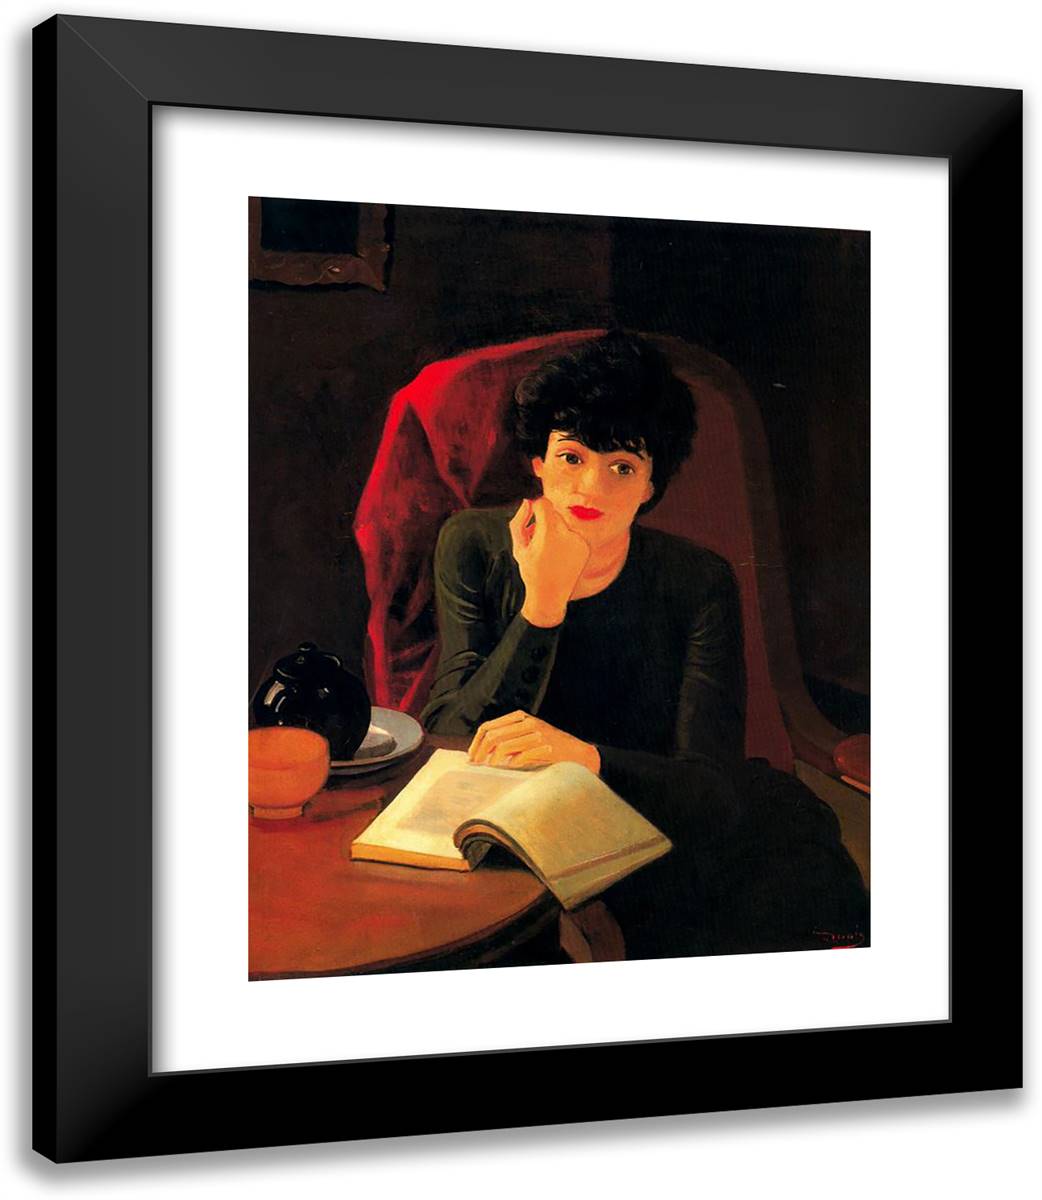 The Cup of Tea 20x23 Black Modern Wood Framed Art Print Poster by Derain, Andre